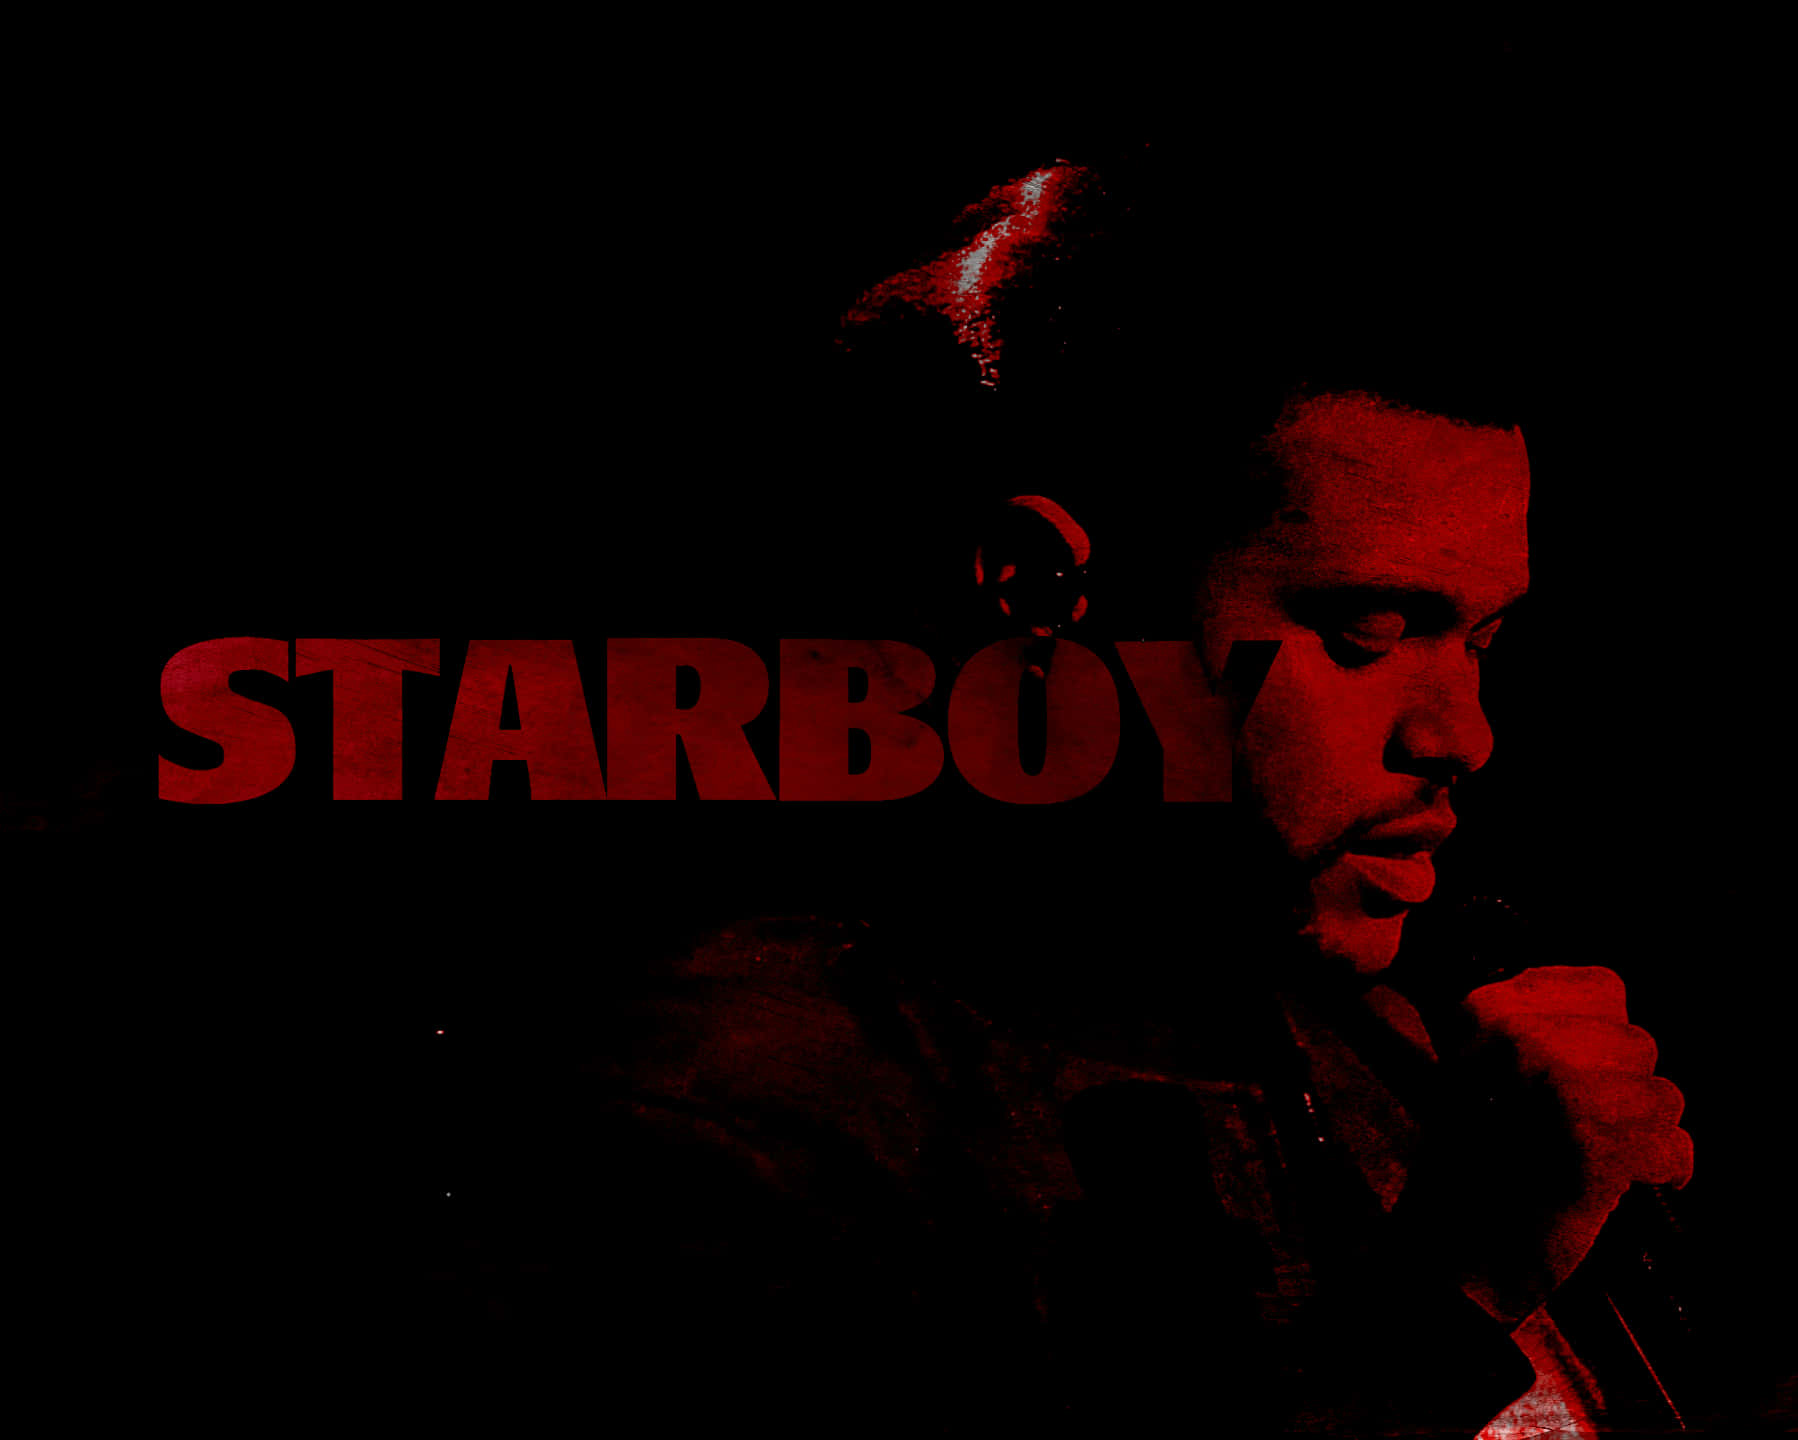 Jam out to The Weeknd on your iPhone! Wallpaper